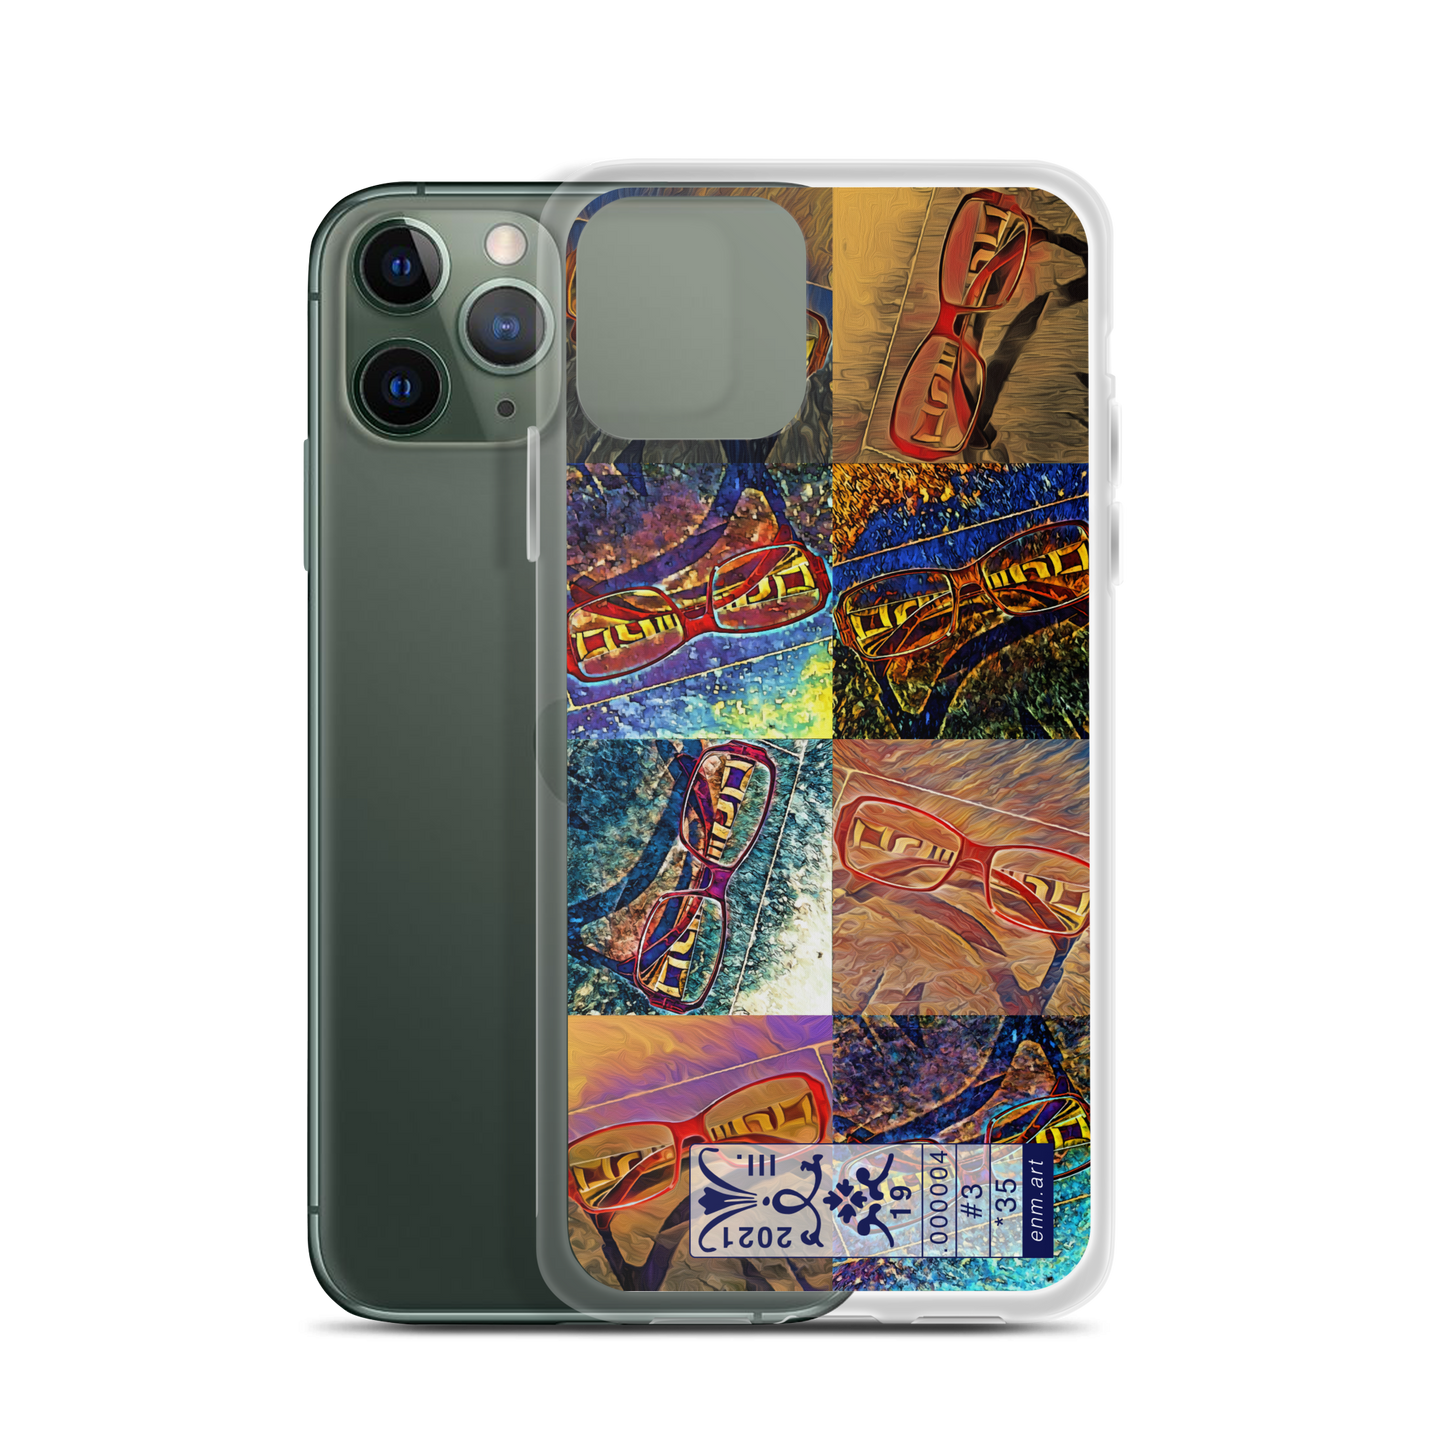 iPhone Case 'Enmempin's Spectacles #3' artist-authorised edition of original artwork by Enmempin N. Midelobo